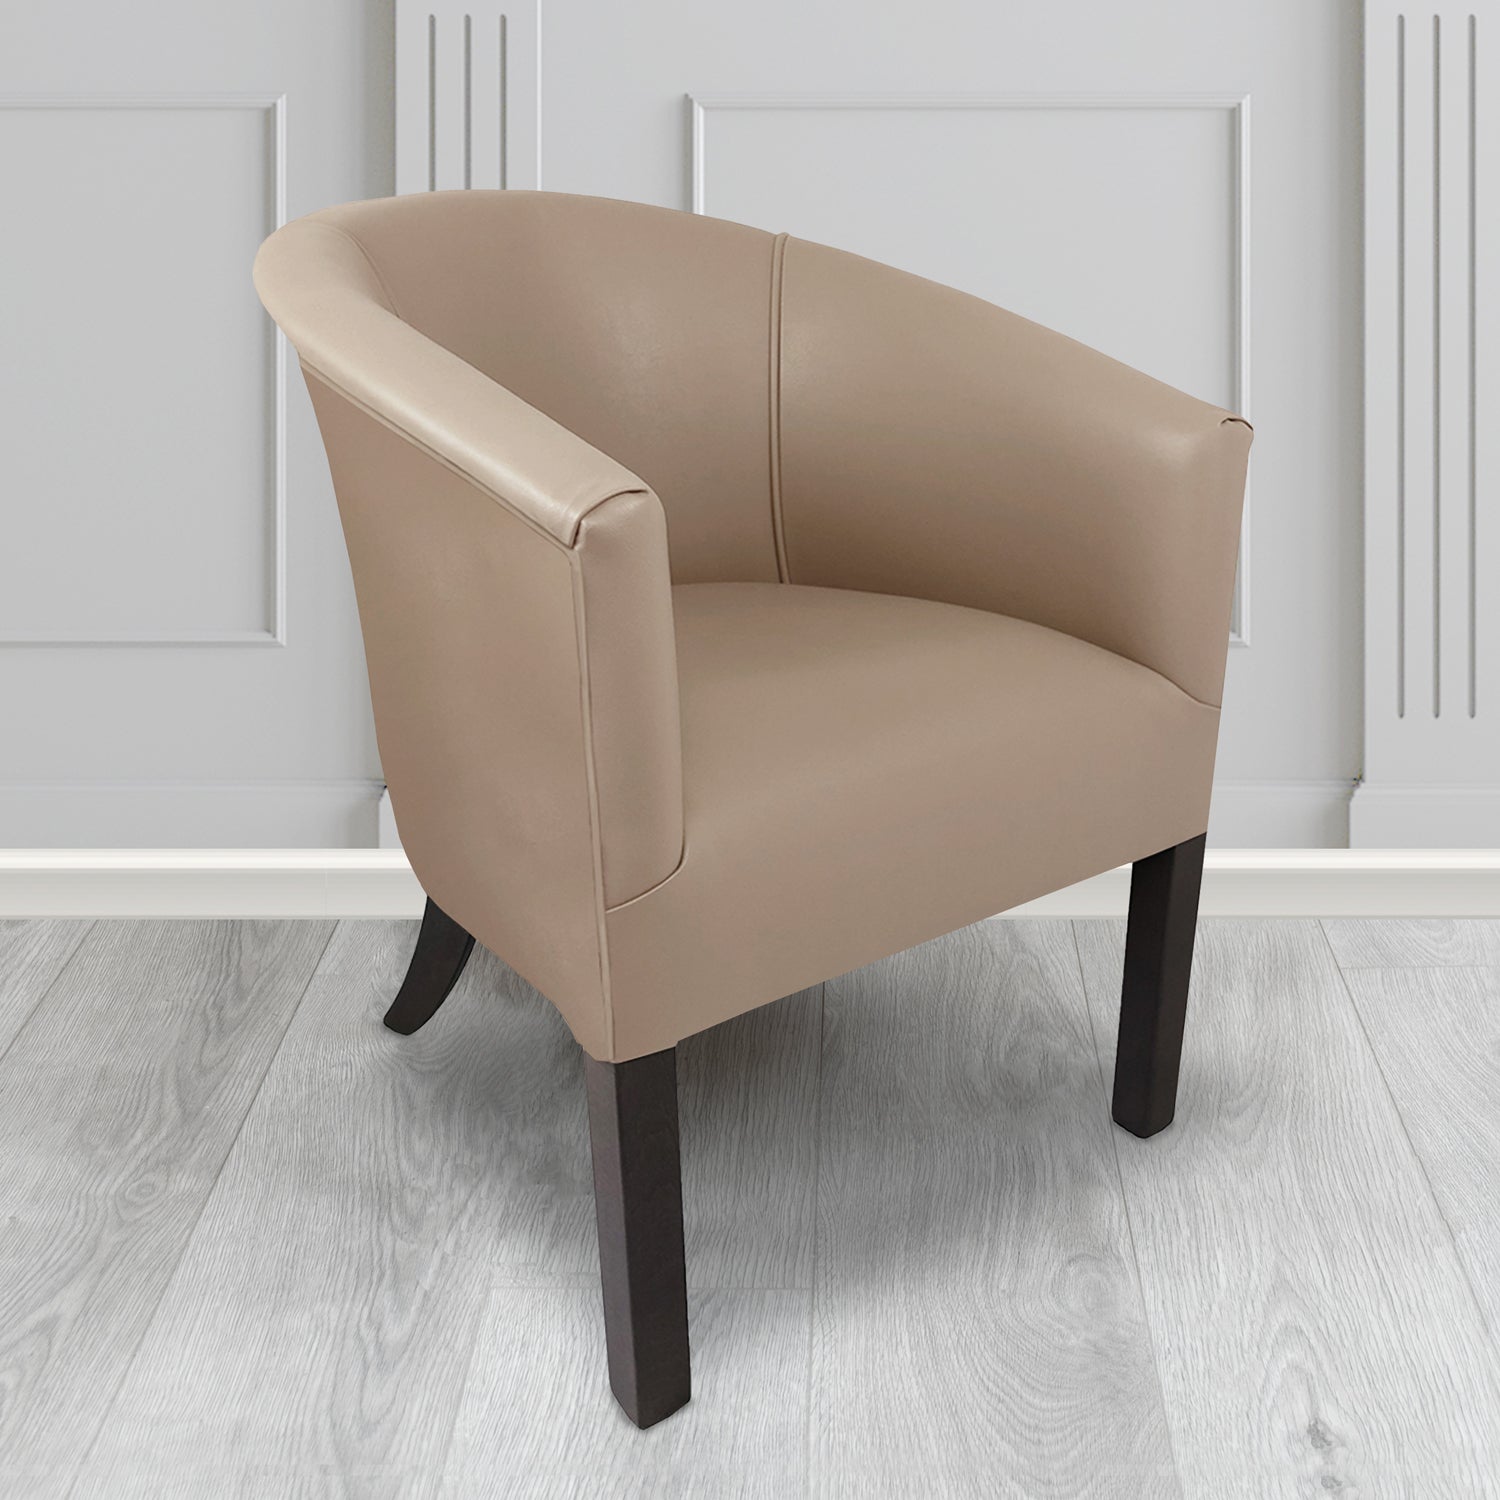 Lewisham Tub Chair in Agua Paint Pot Mink Crib 5 Faux Leather - Antimicrobial, Stain Resistant & Waterproof - The Tub Chair Shop